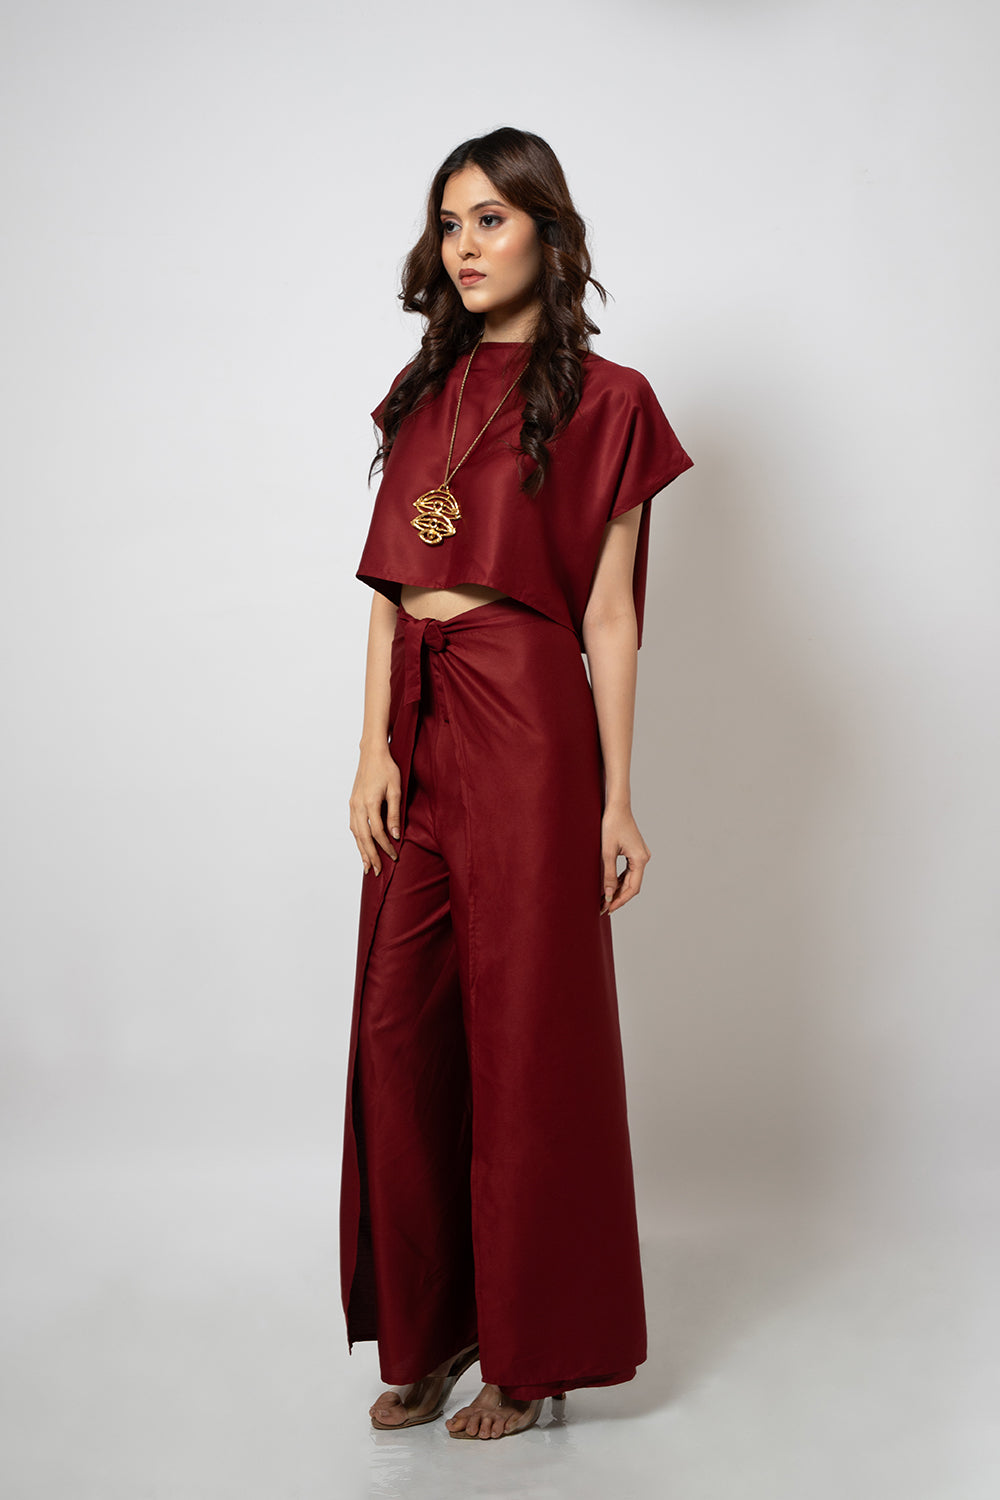 8. A zero waste red cotton blend crop top and pants co-ord set